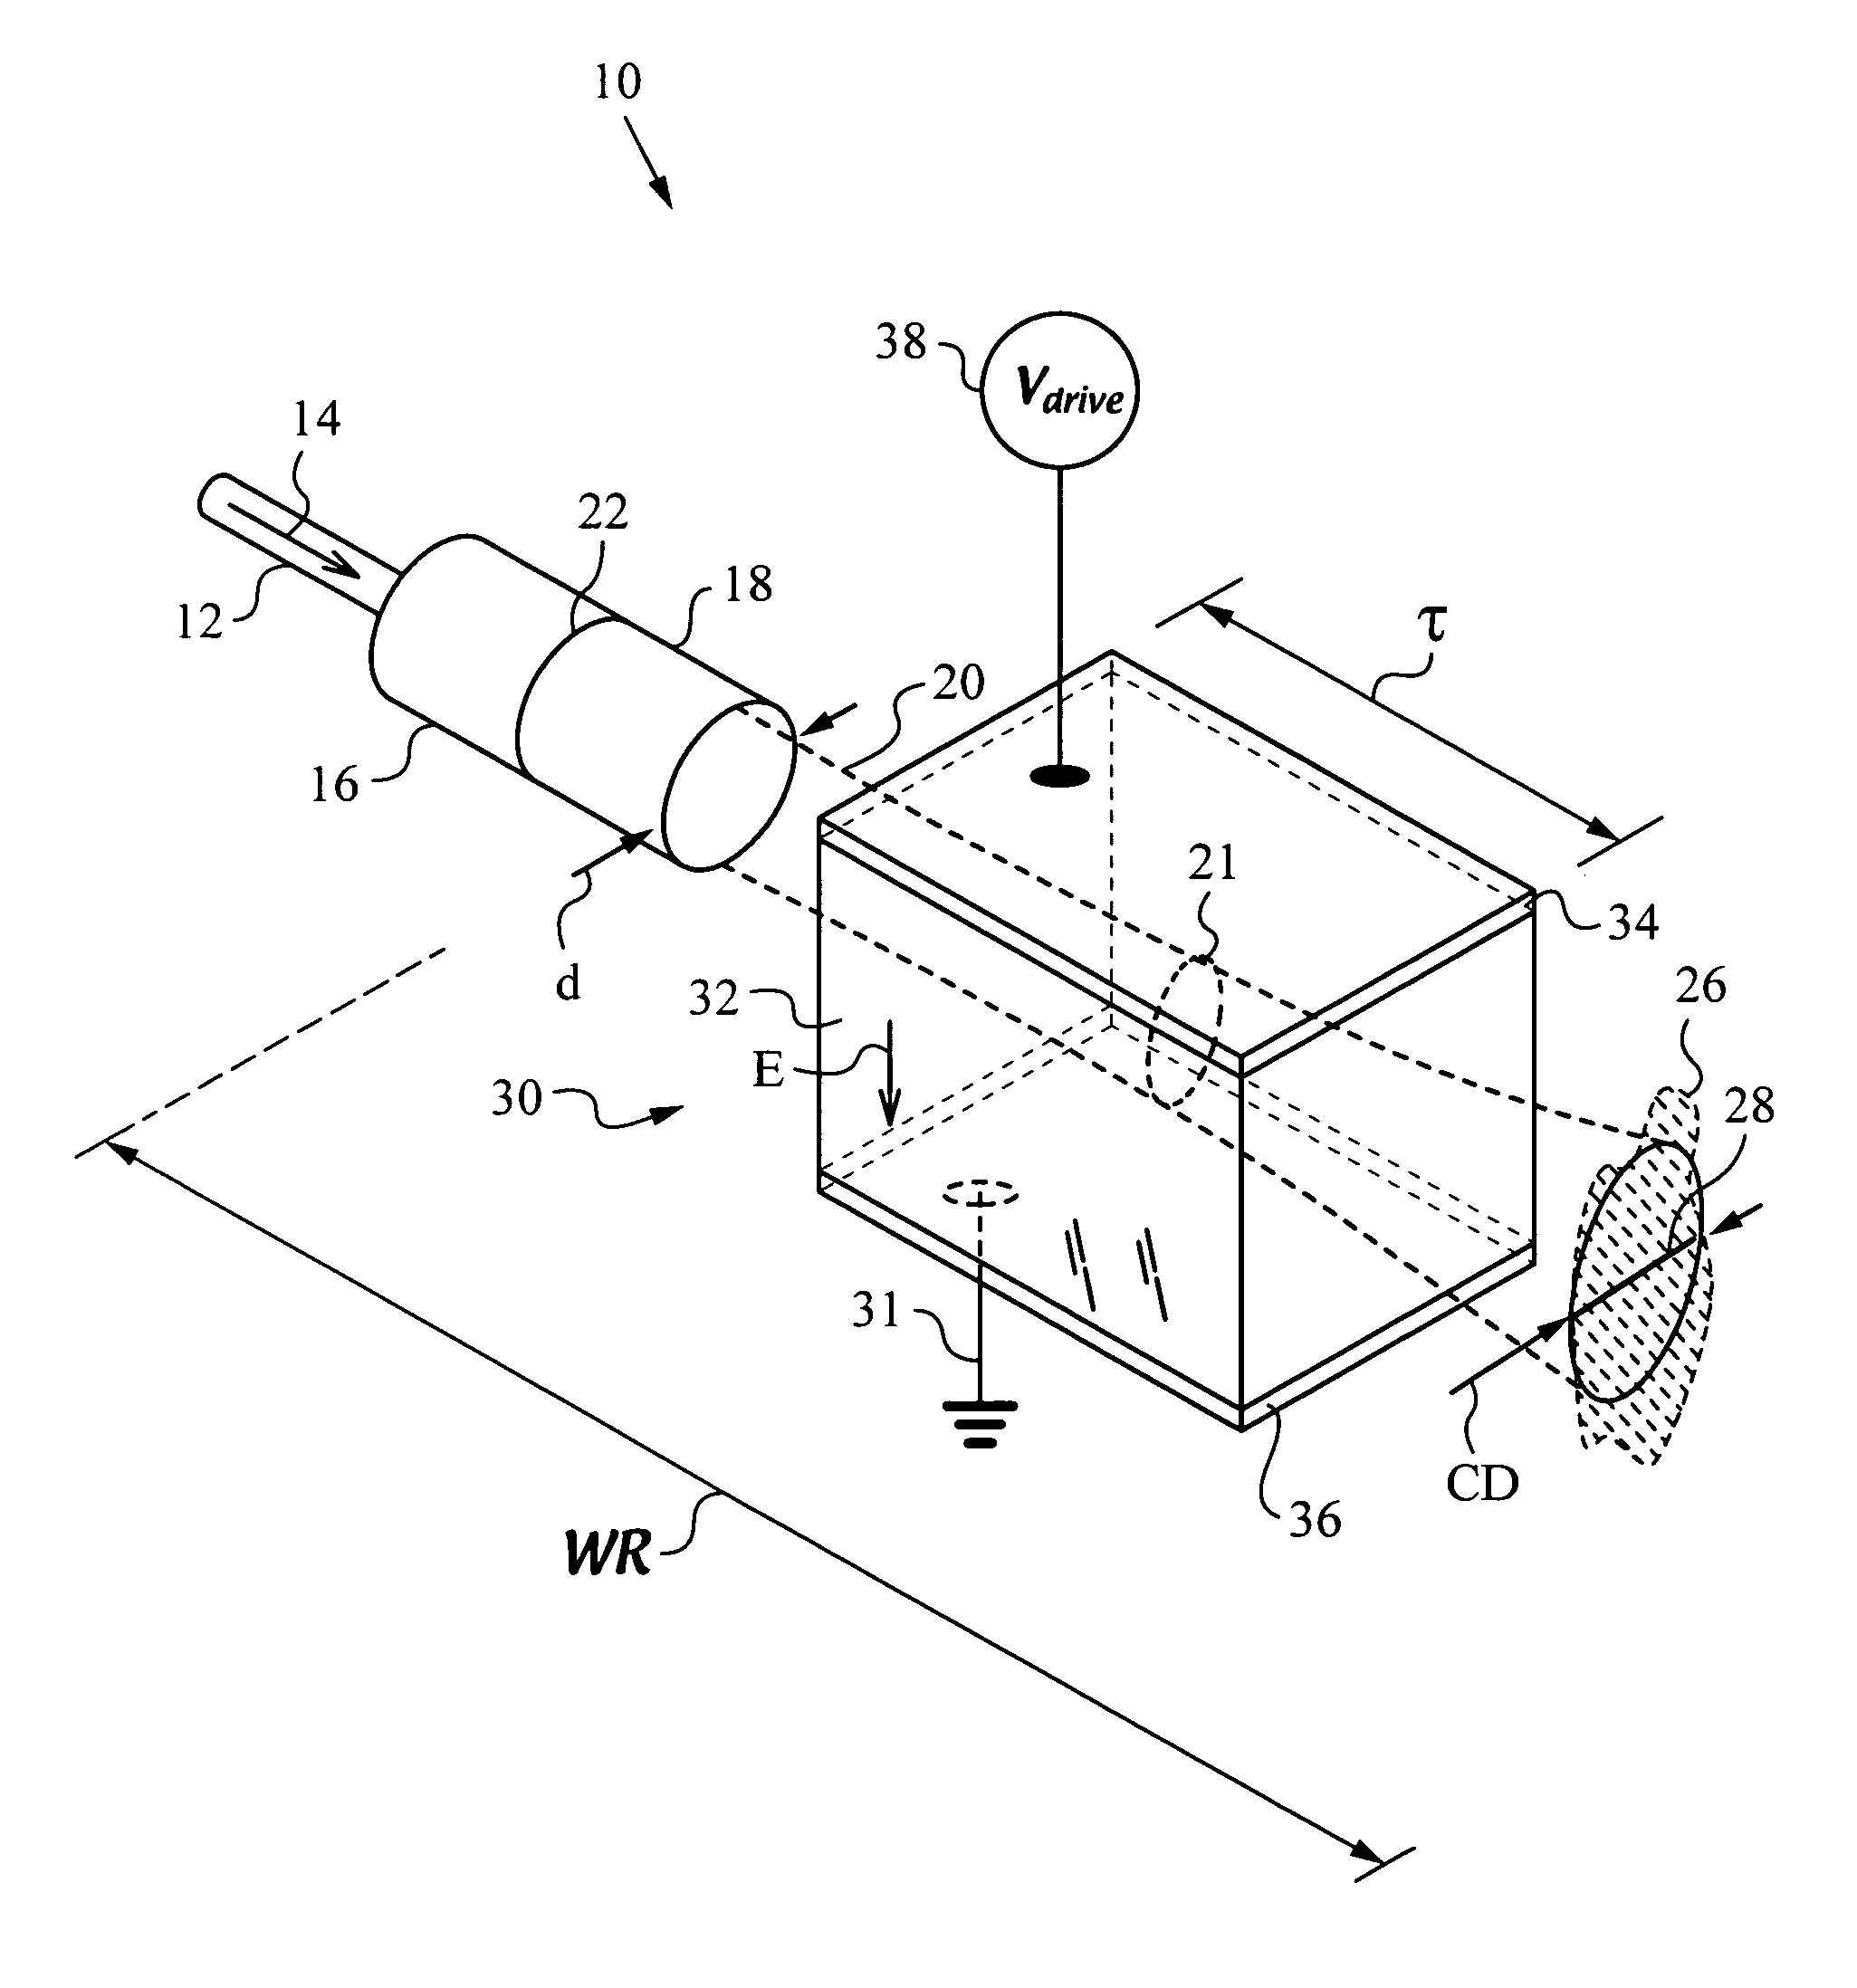 Fiberoptic reconfigurable devices with beam shaping for low-voltage operation